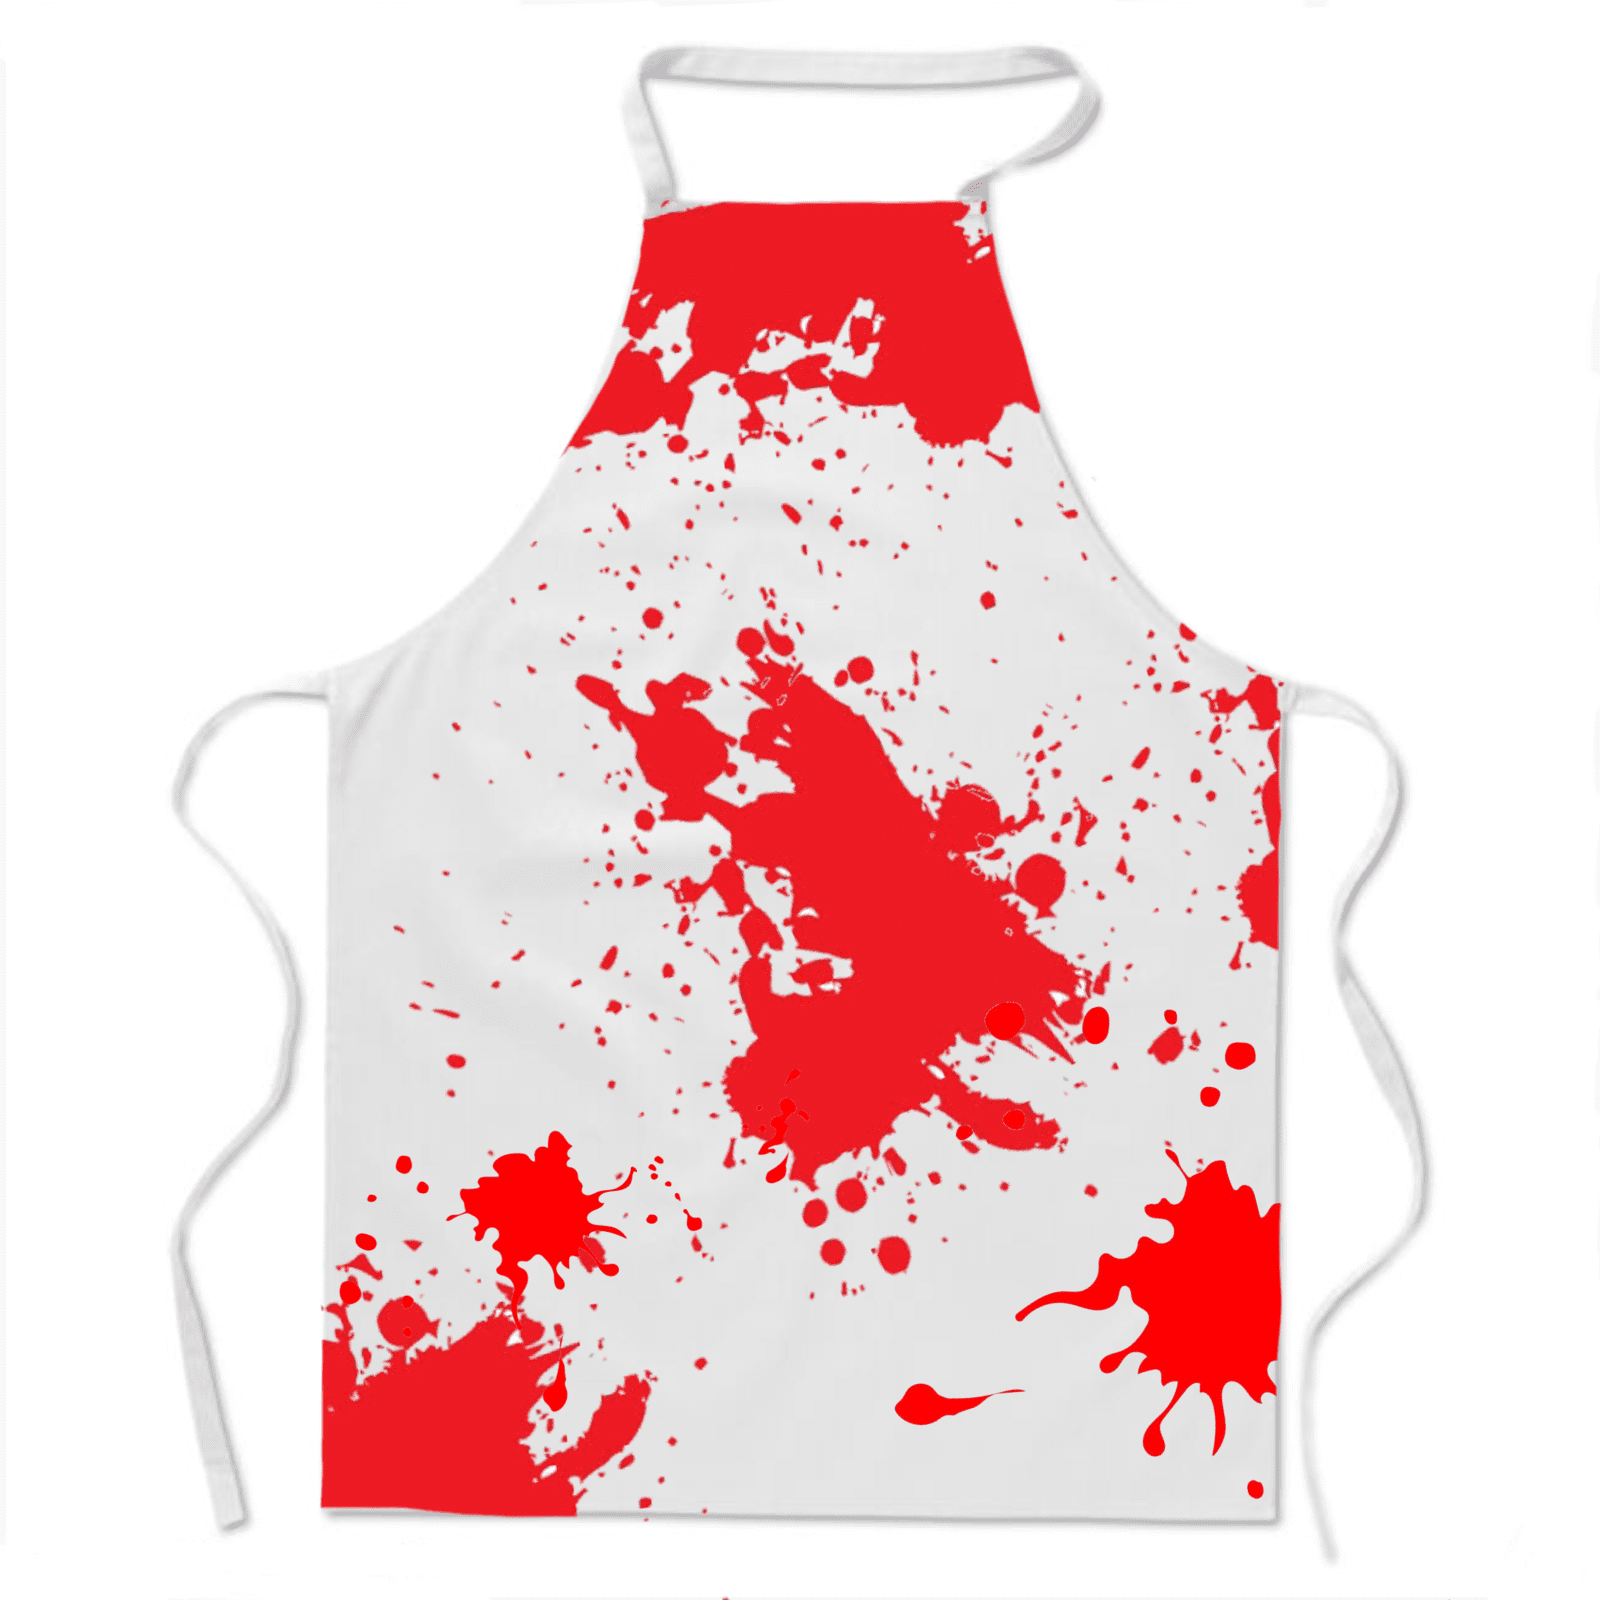 Featured image for “Bloody Apron”